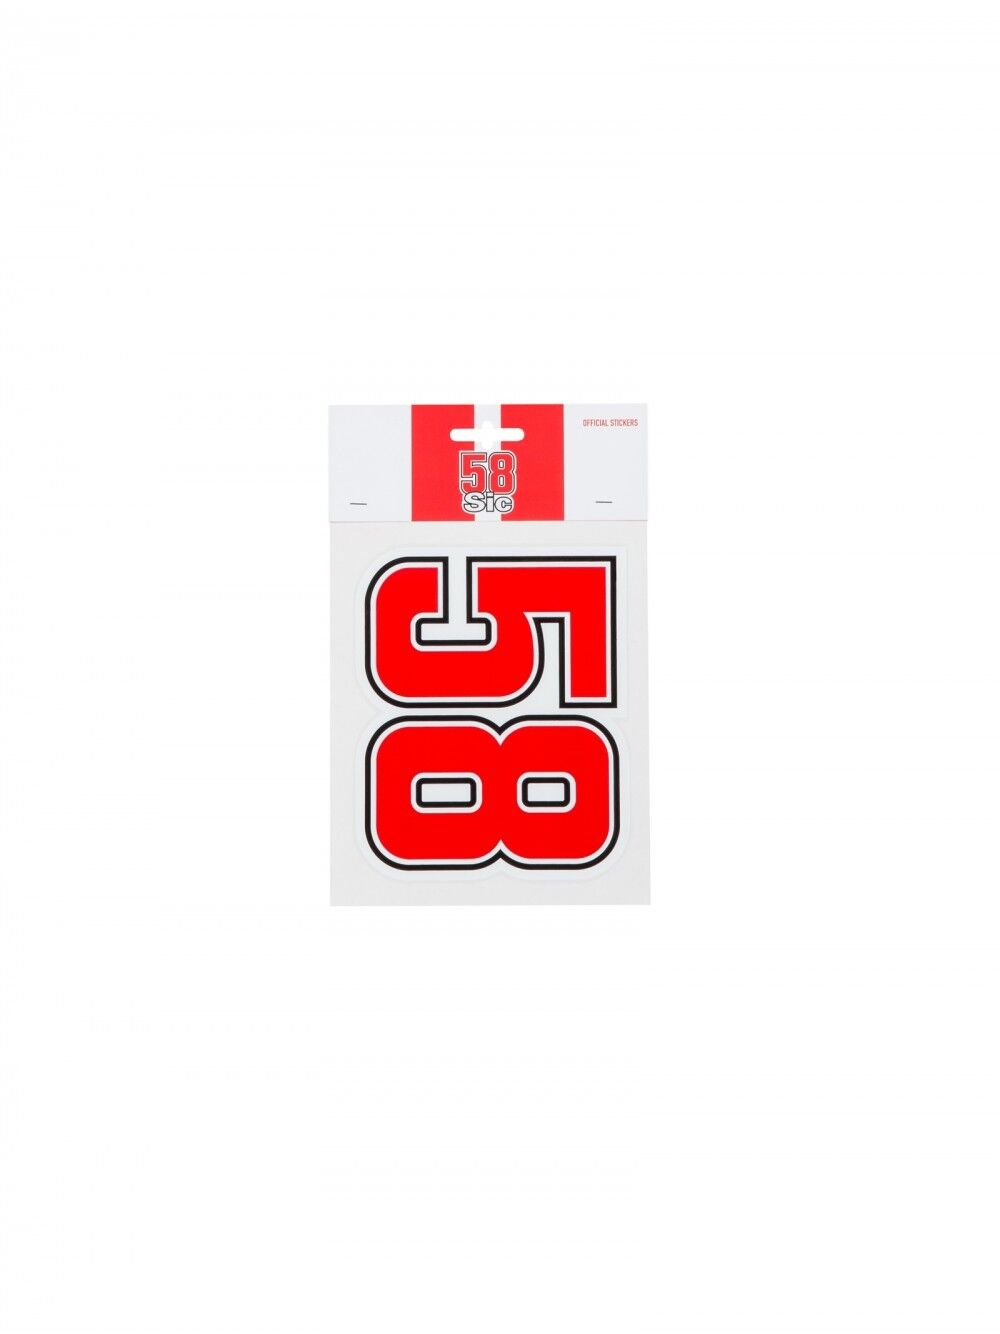 New Official Supersic 58 Sticker - 18 55009